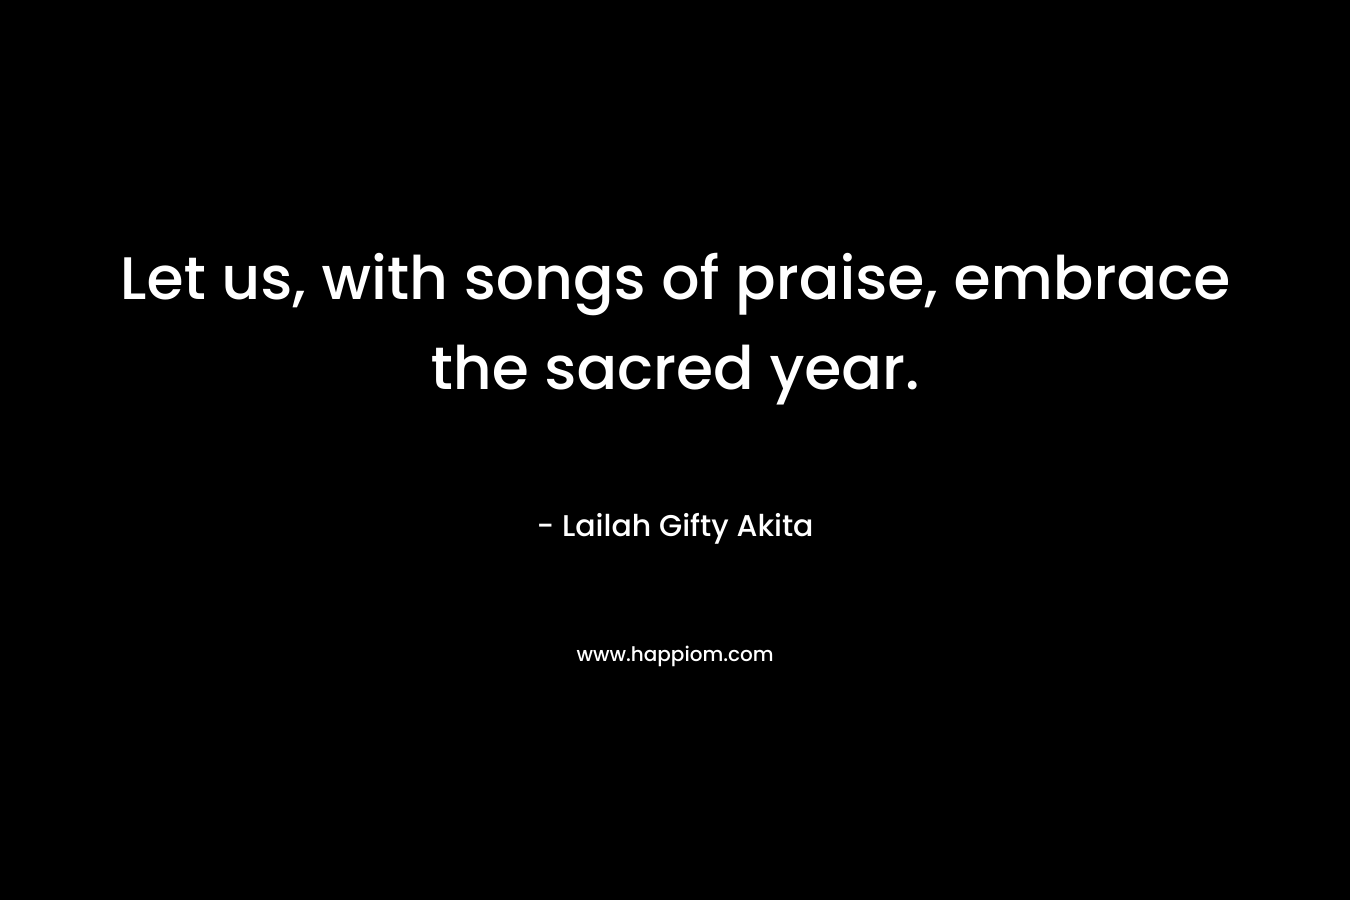 Let us, with songs of praise, embrace the sacred year. – Lailah Gifty Akita